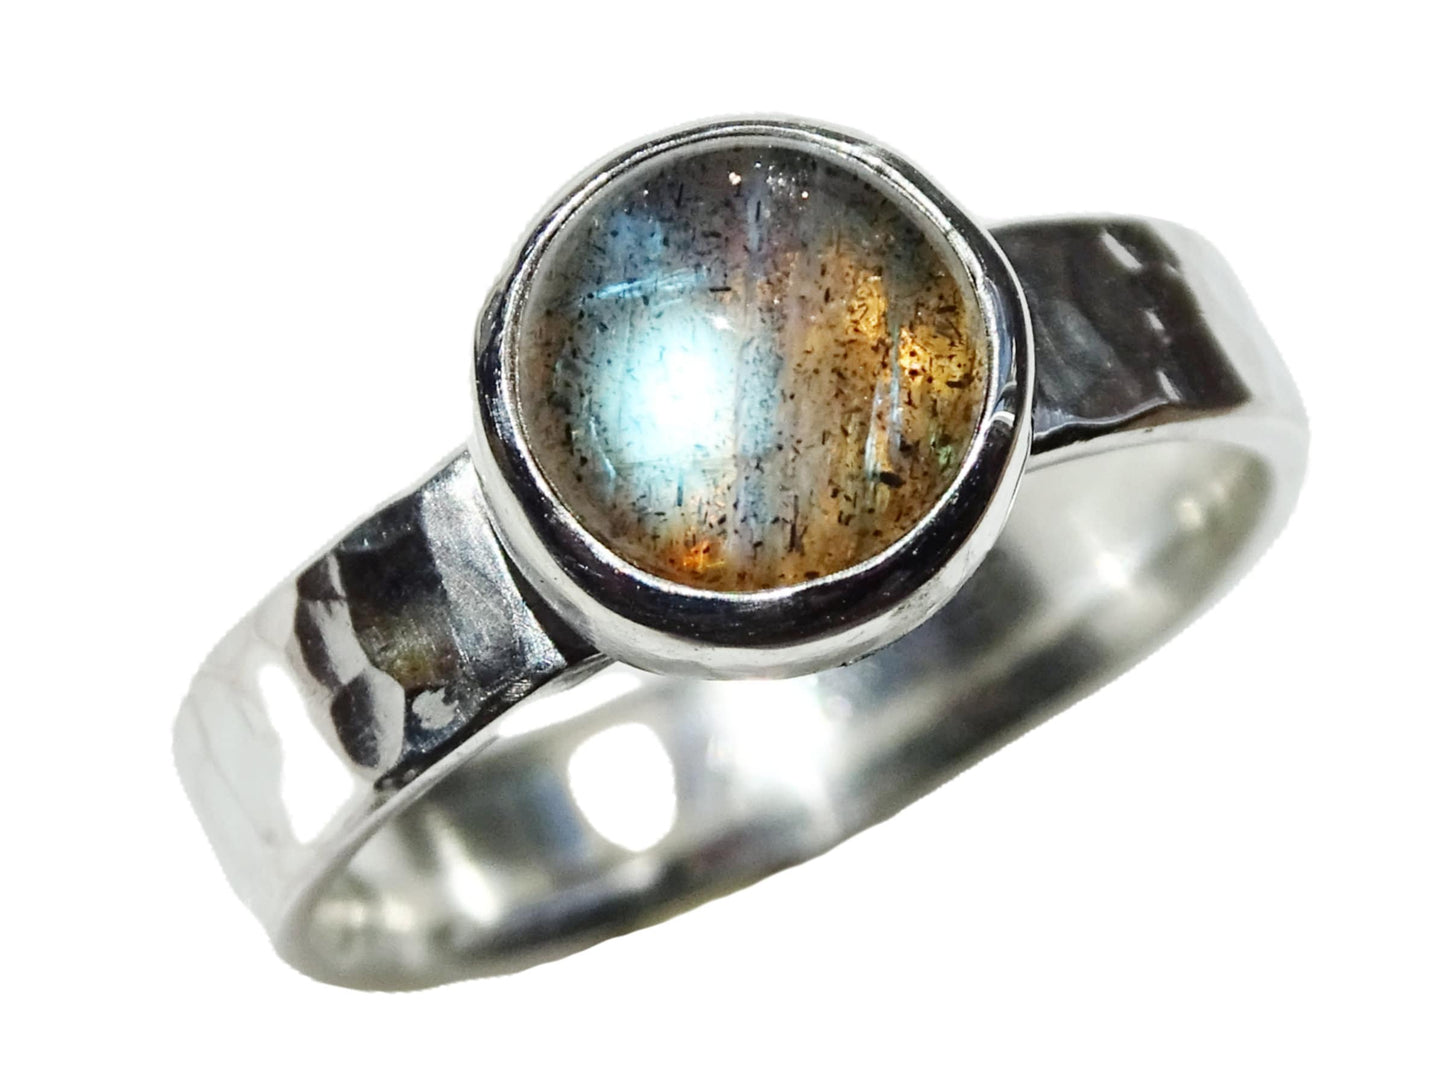 blue labradorite ring silver, alternative engagement ring unique, blue gemstone ring hammered, silver promise ring labradorite gift for her - CrazyAss Jewelry Designs